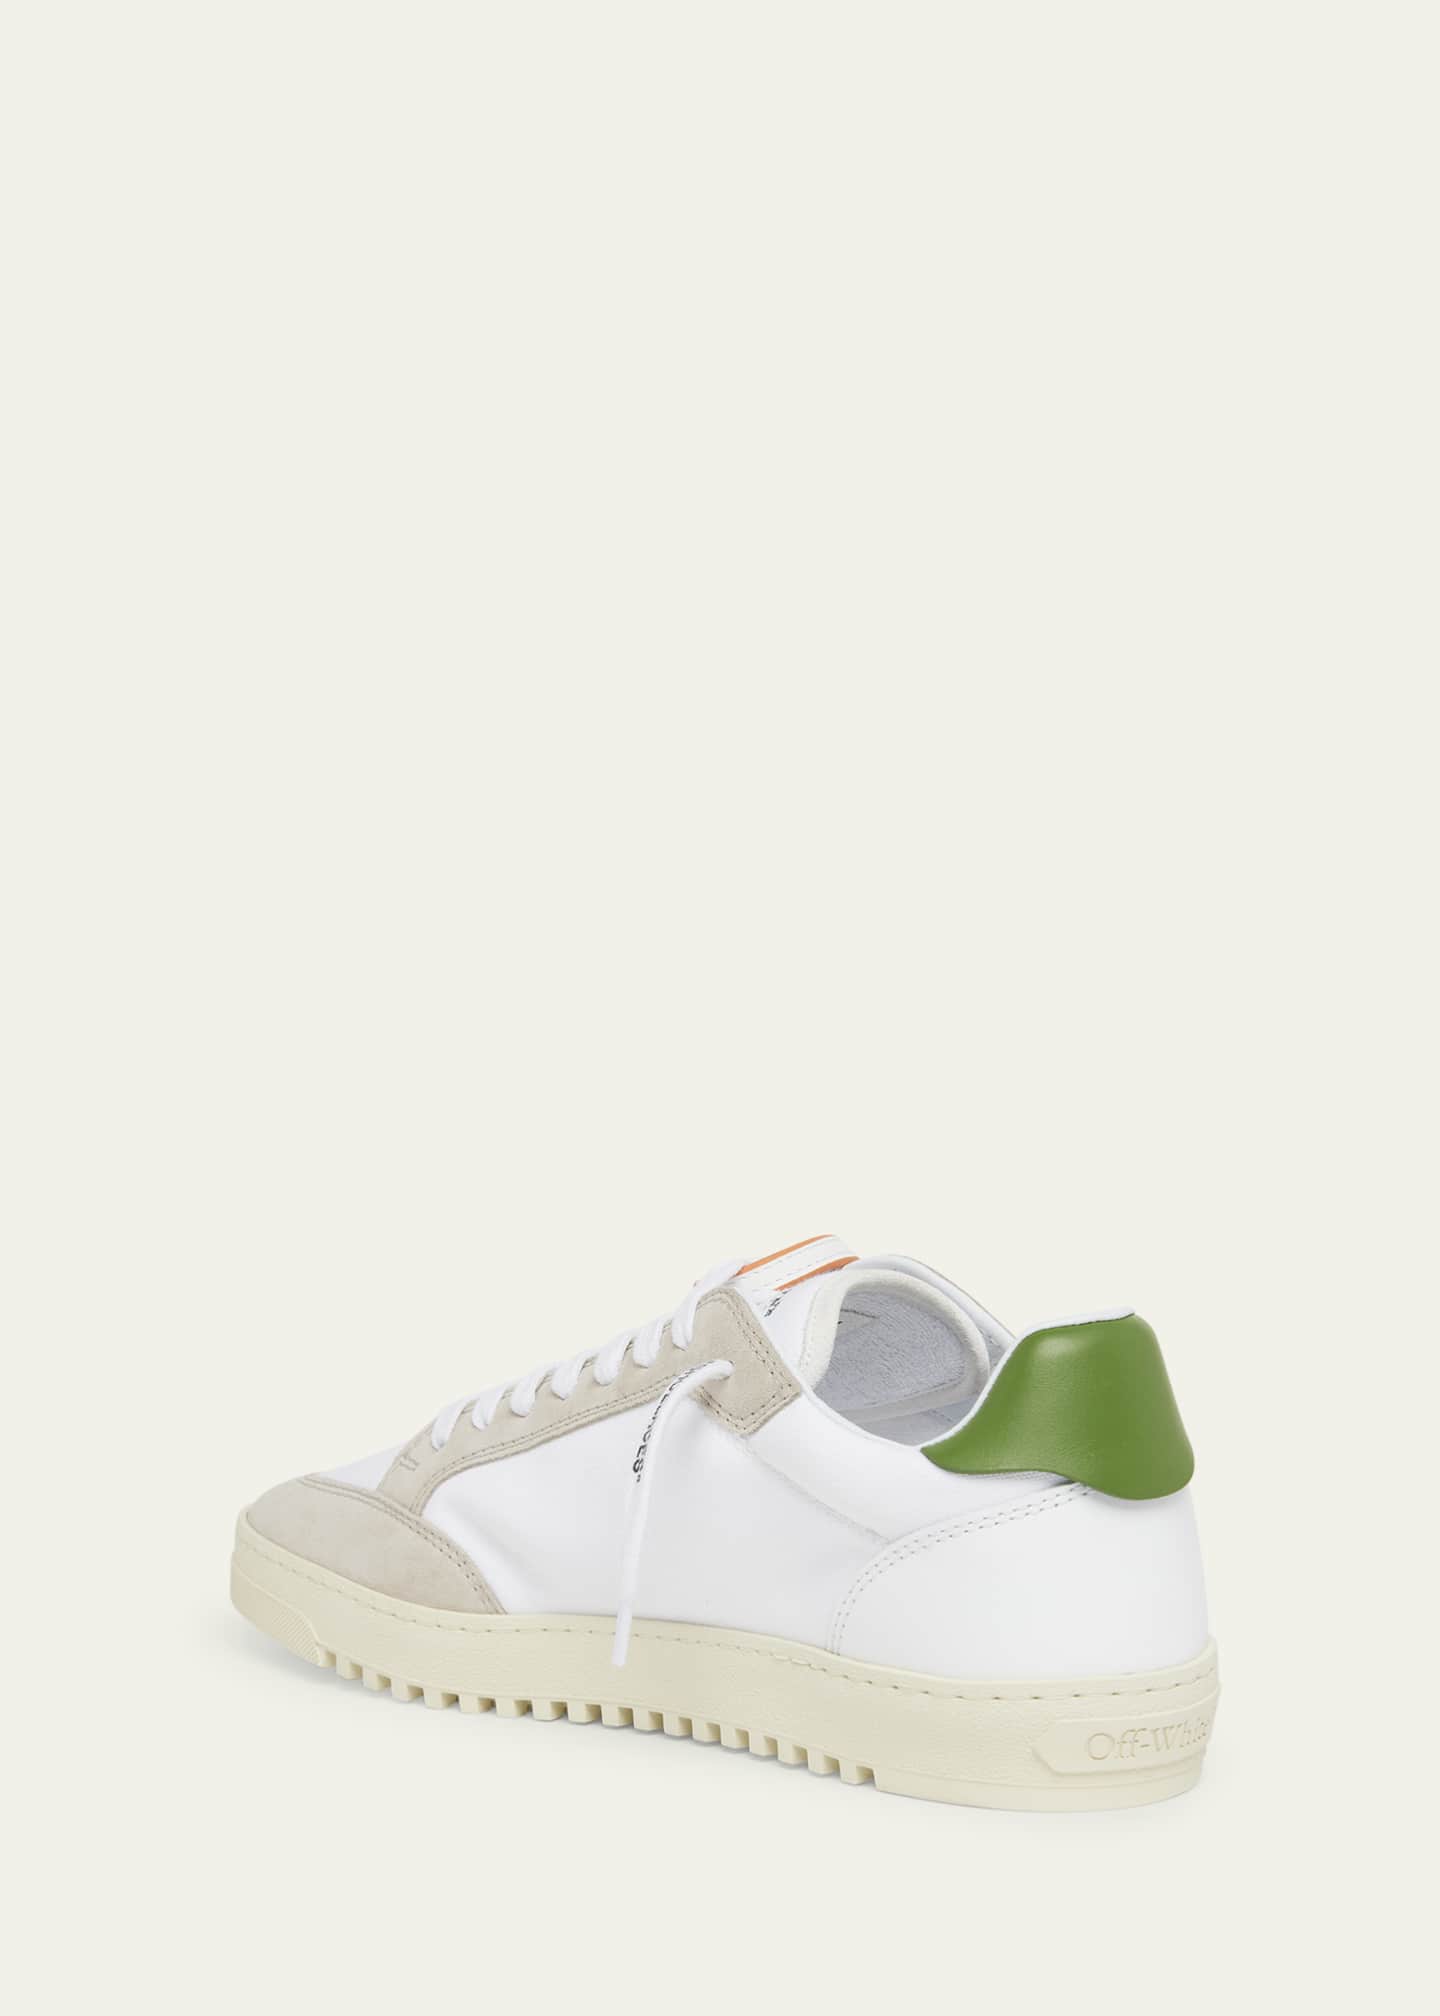 Off-White Men's 5.0 Canvas and Leather Low-Top Sneakers Image 4 of 5